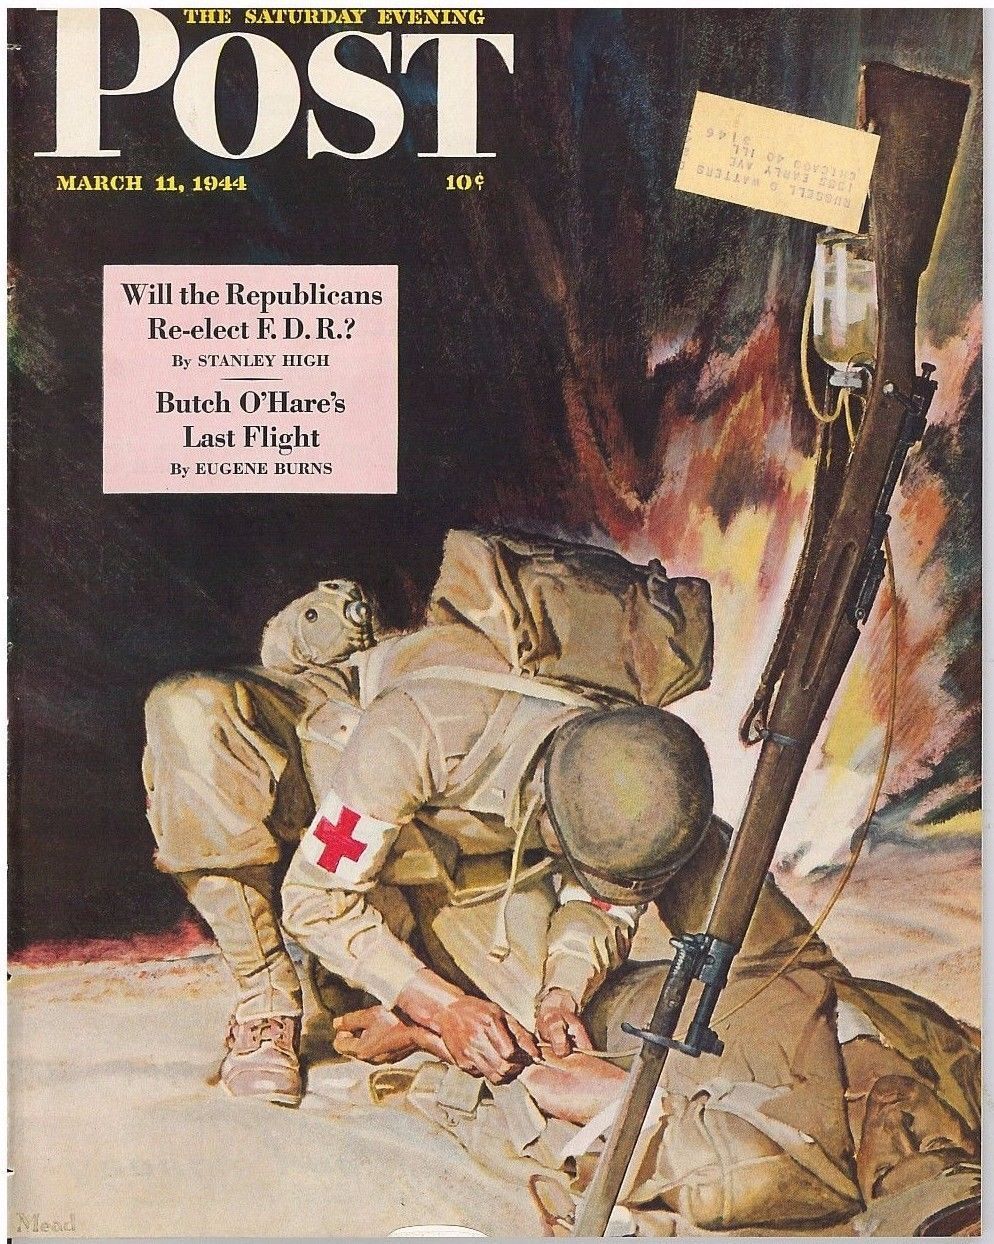 The Saturday Evening Post  Fred Ludekens February 26 1944  Vintage Gift  